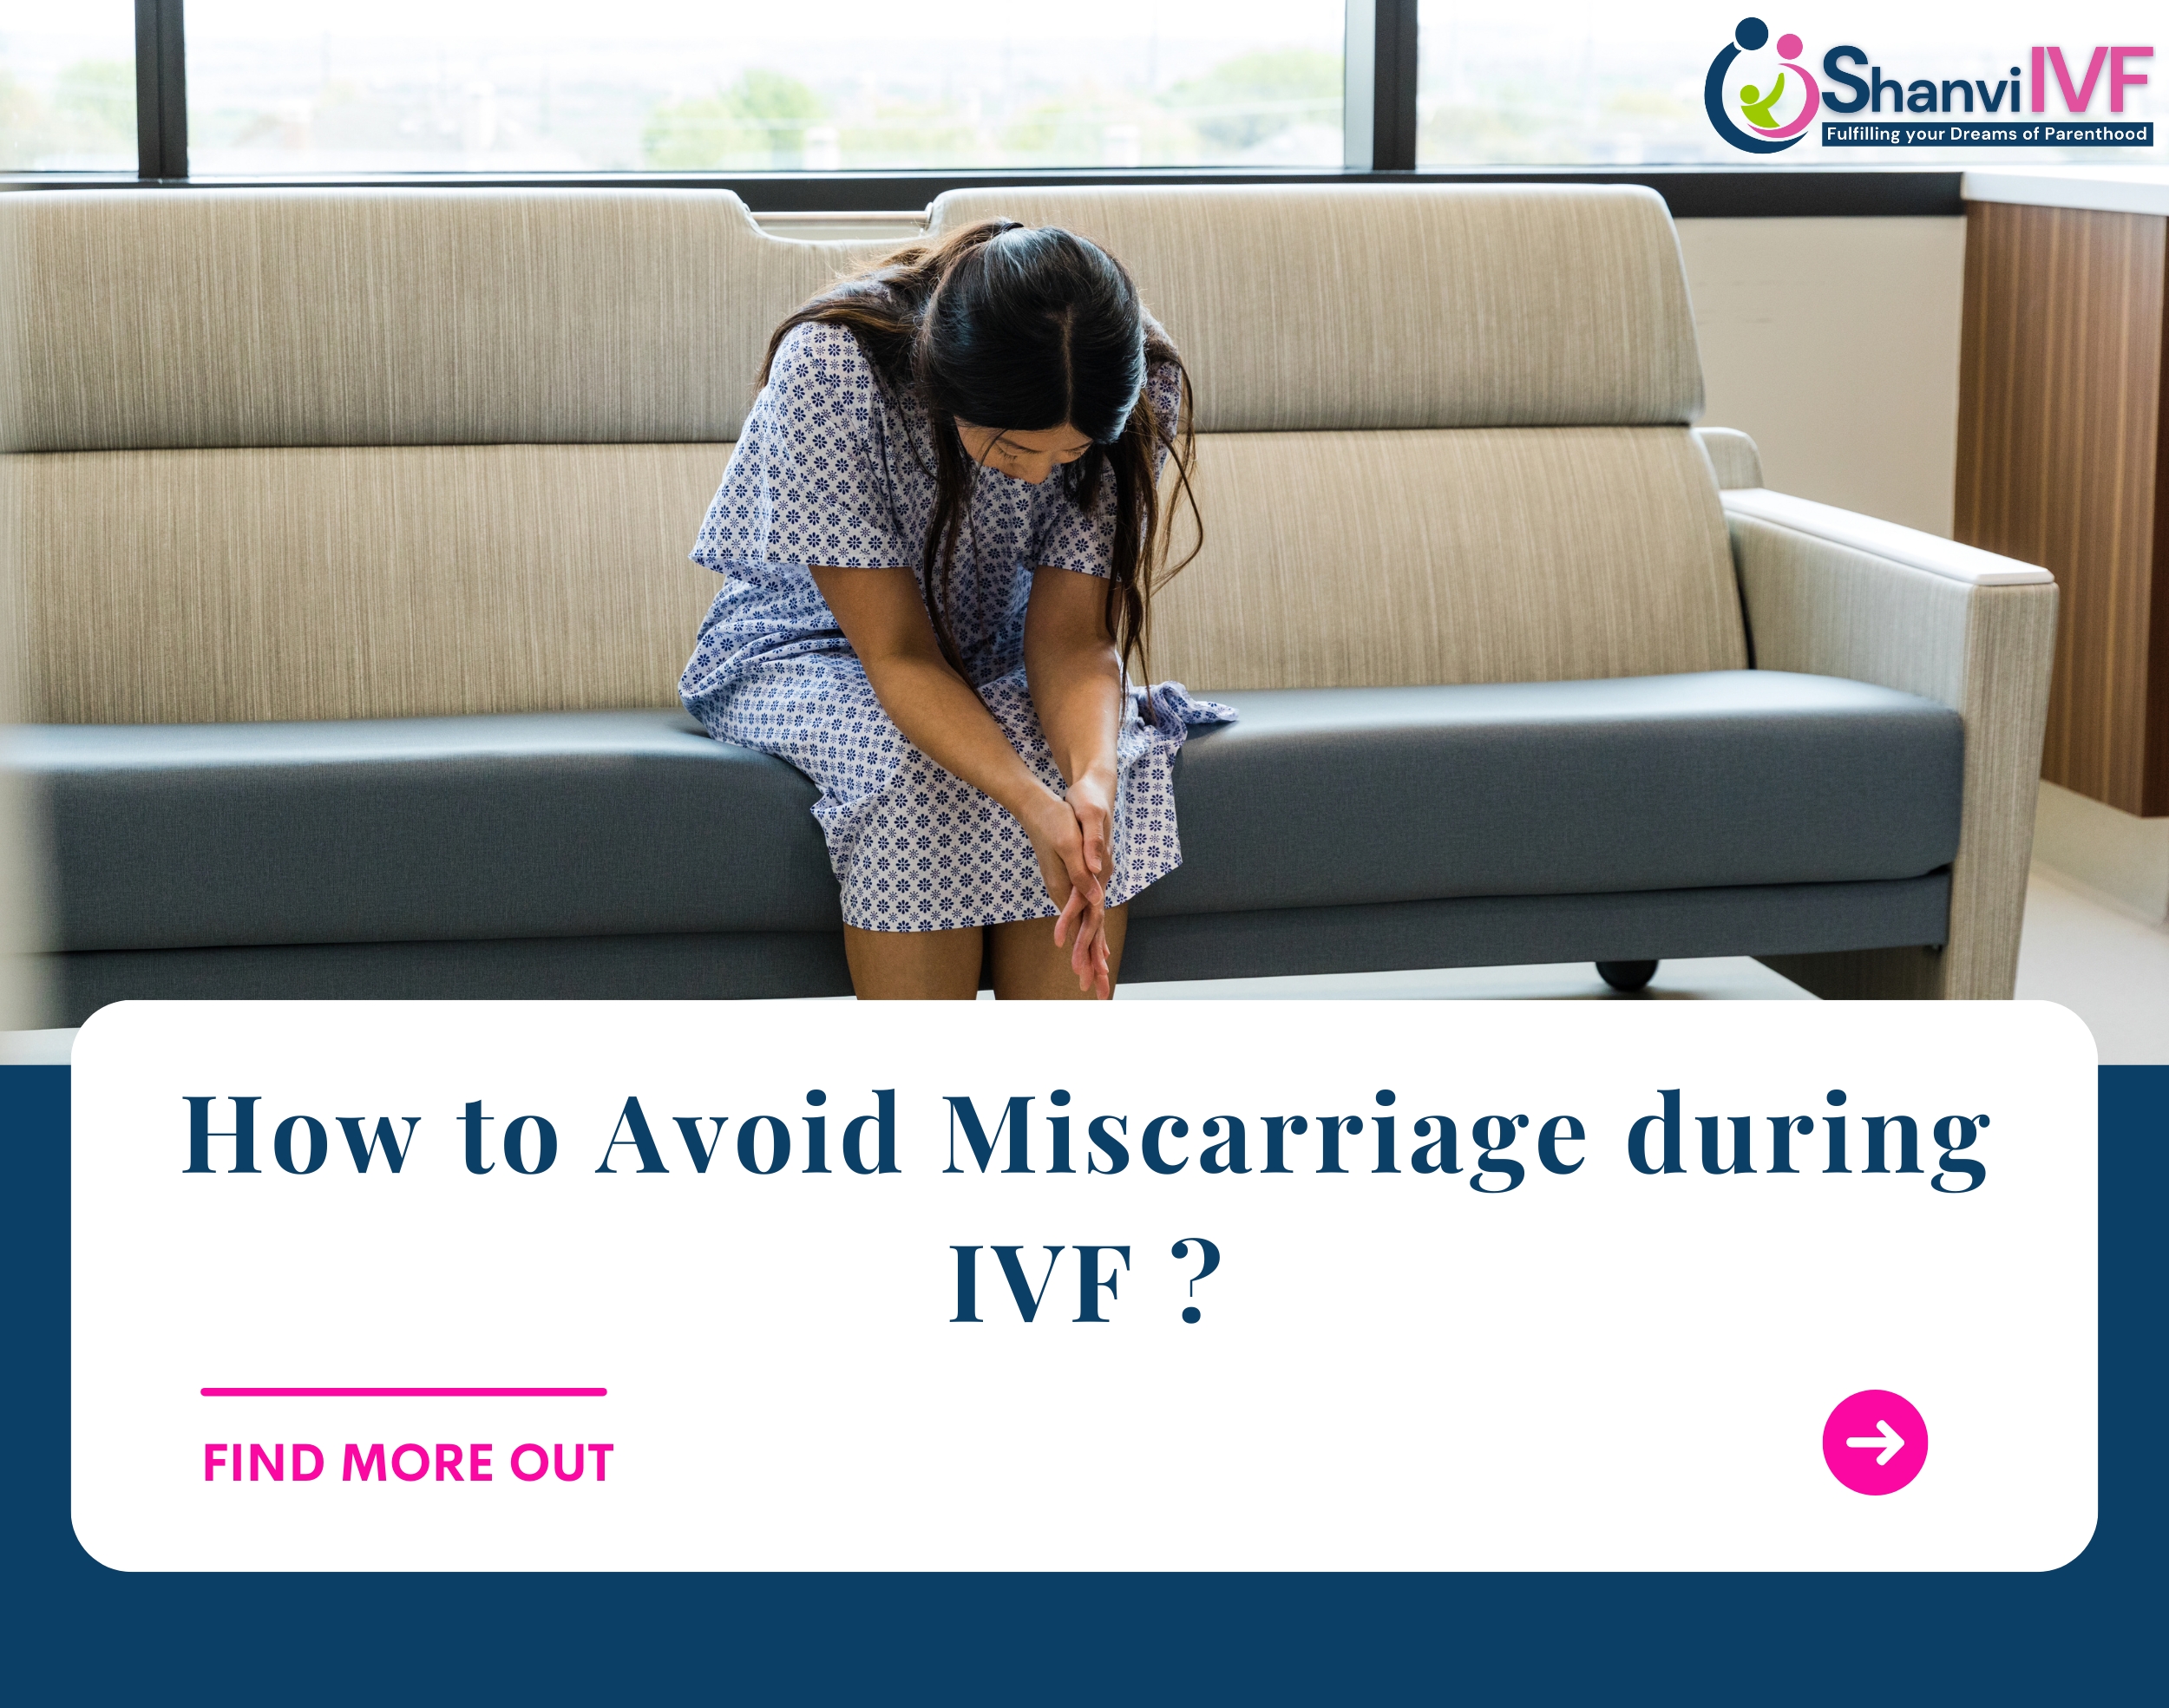 How to Avoid Miscarriage during IVF